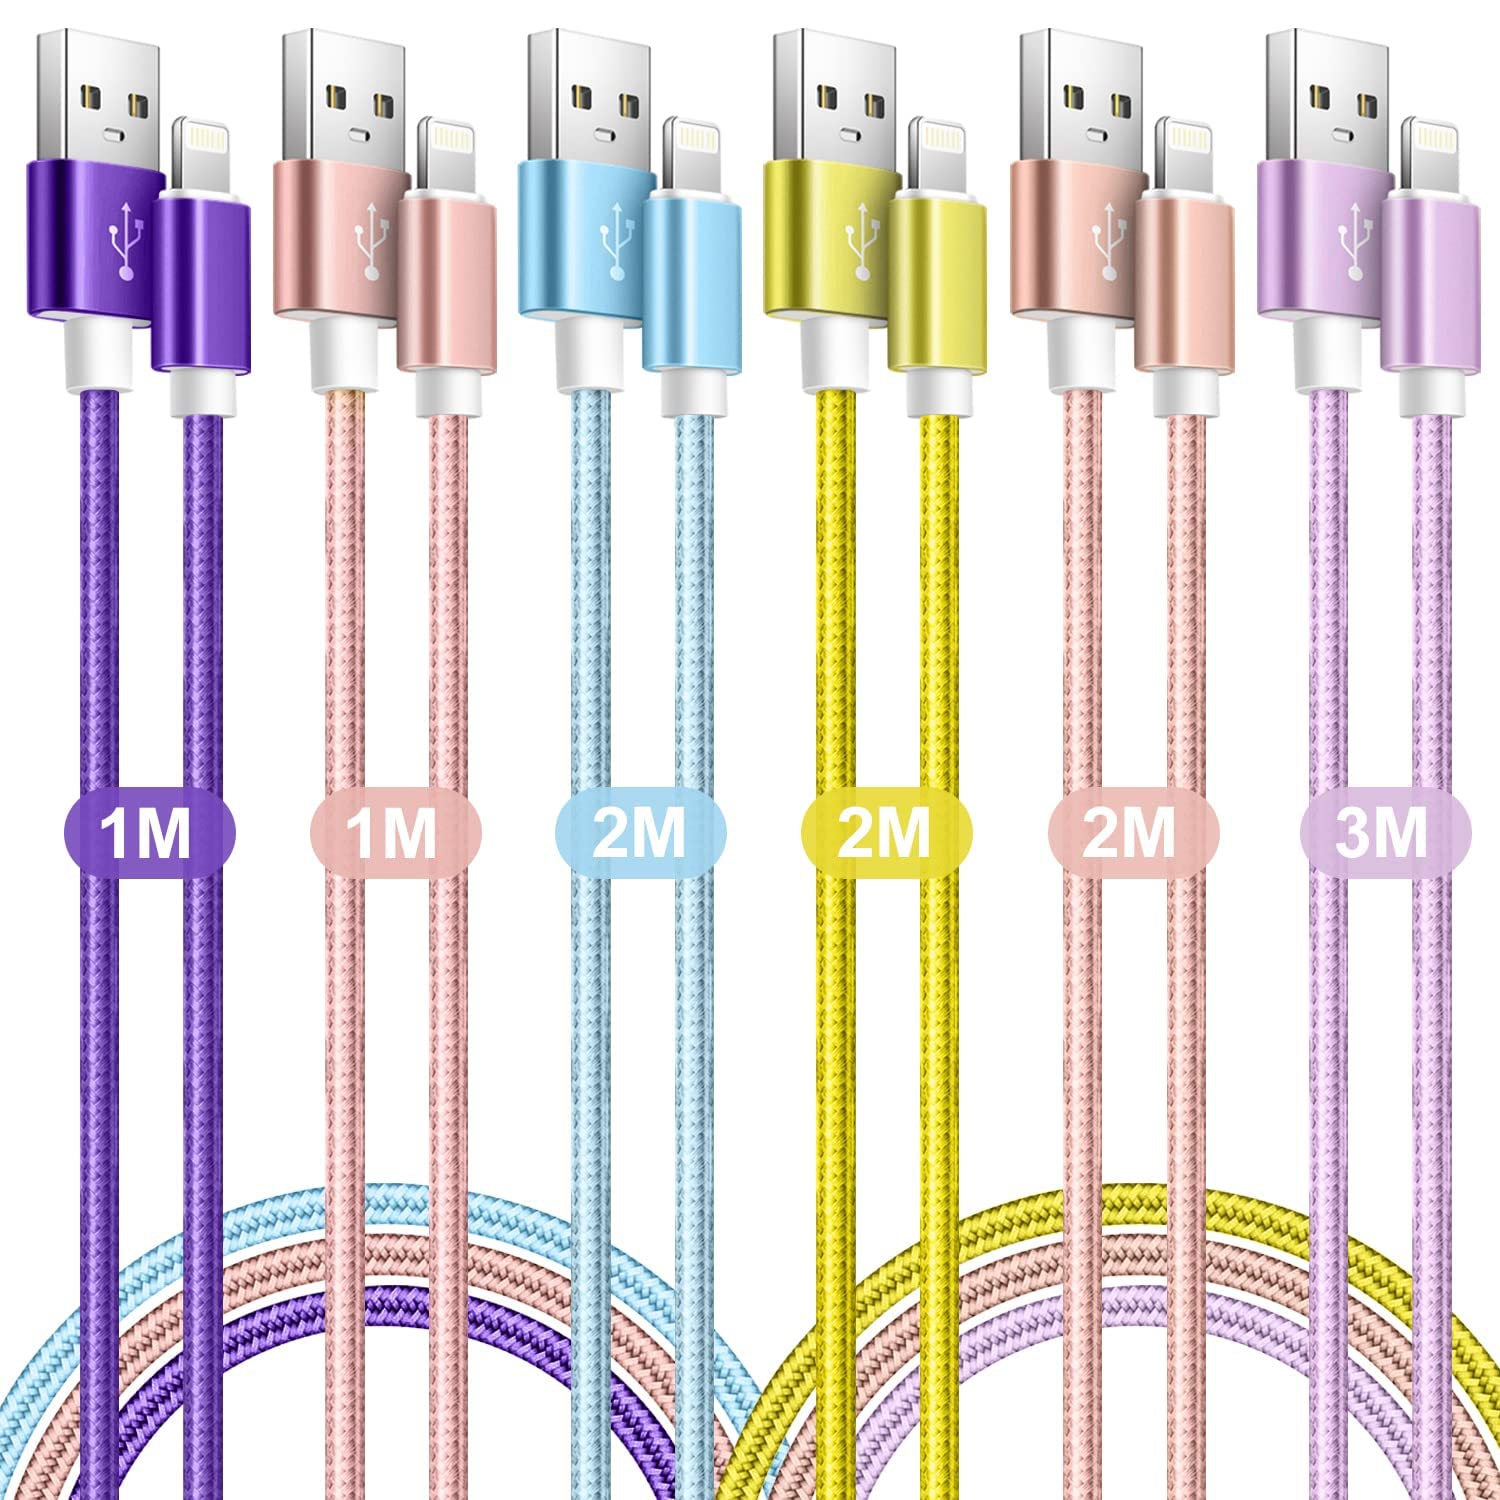 Nylon Braided iPhone Charger Cable, 6pack (3/3/6/6/6/10ft) iPhone Charger Cord, MFi Certified Lightning Cable, for iPhone 14 13 12 11 Pro Max XS XR X 8 7 6 iPad iPod